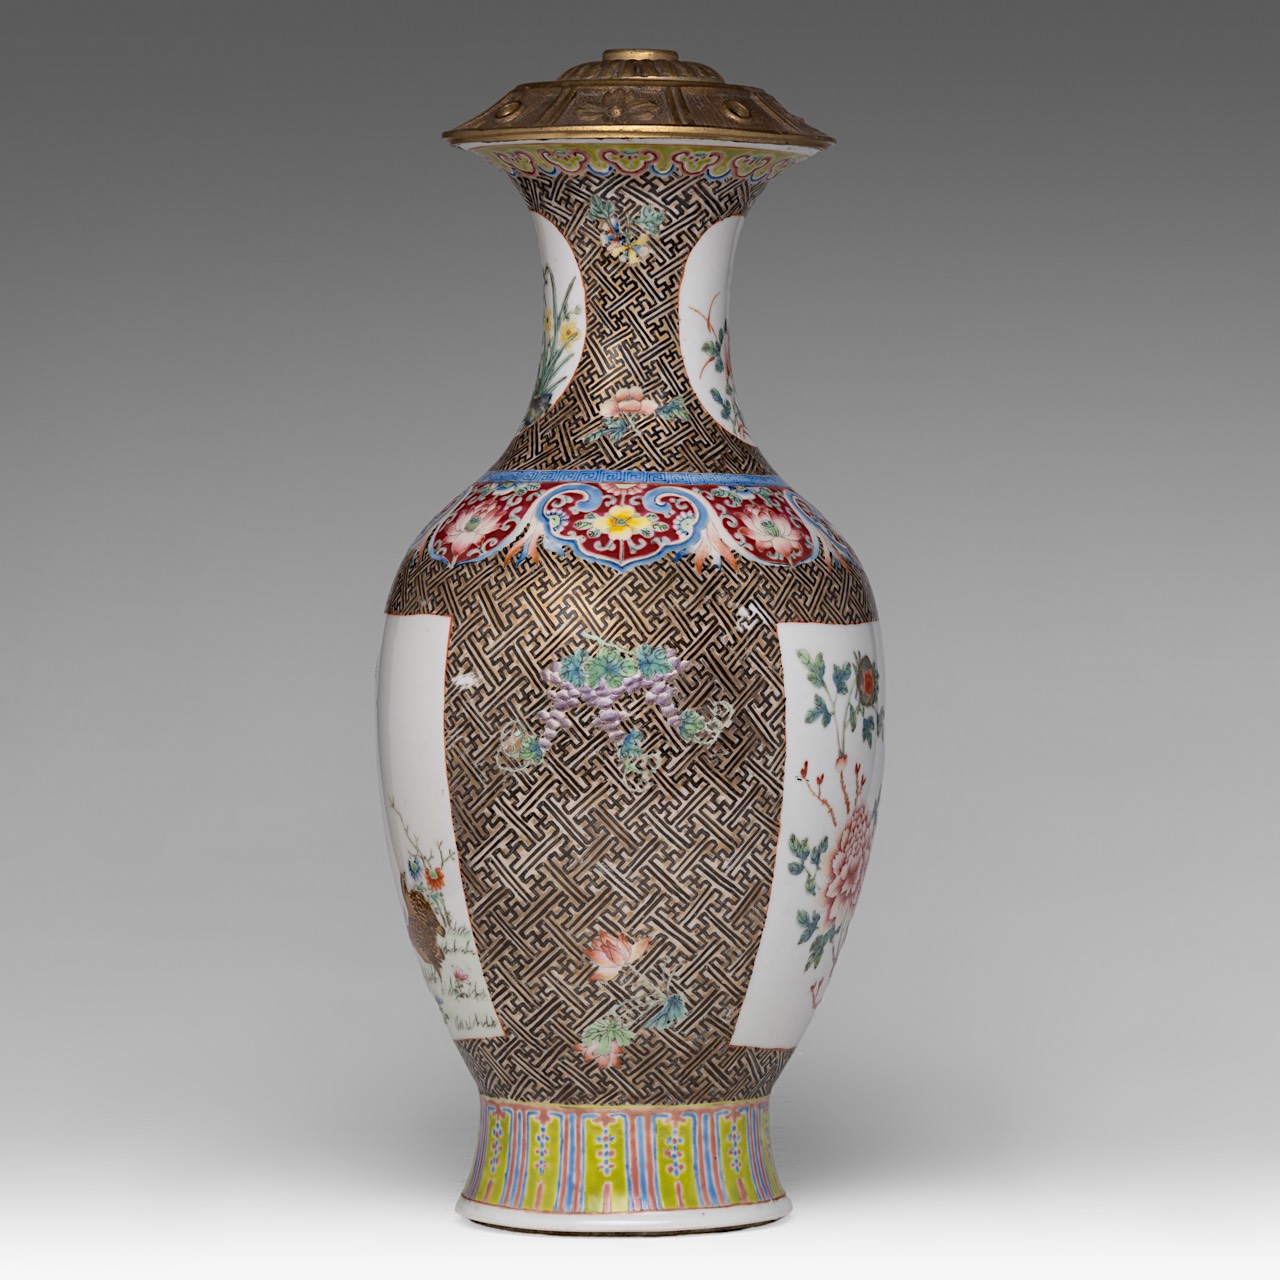 A fine Chinese famille rose 'Pheasants and Quails' baluster vase, with a Qianlong mark, late 19thC, - Image 4 of 6